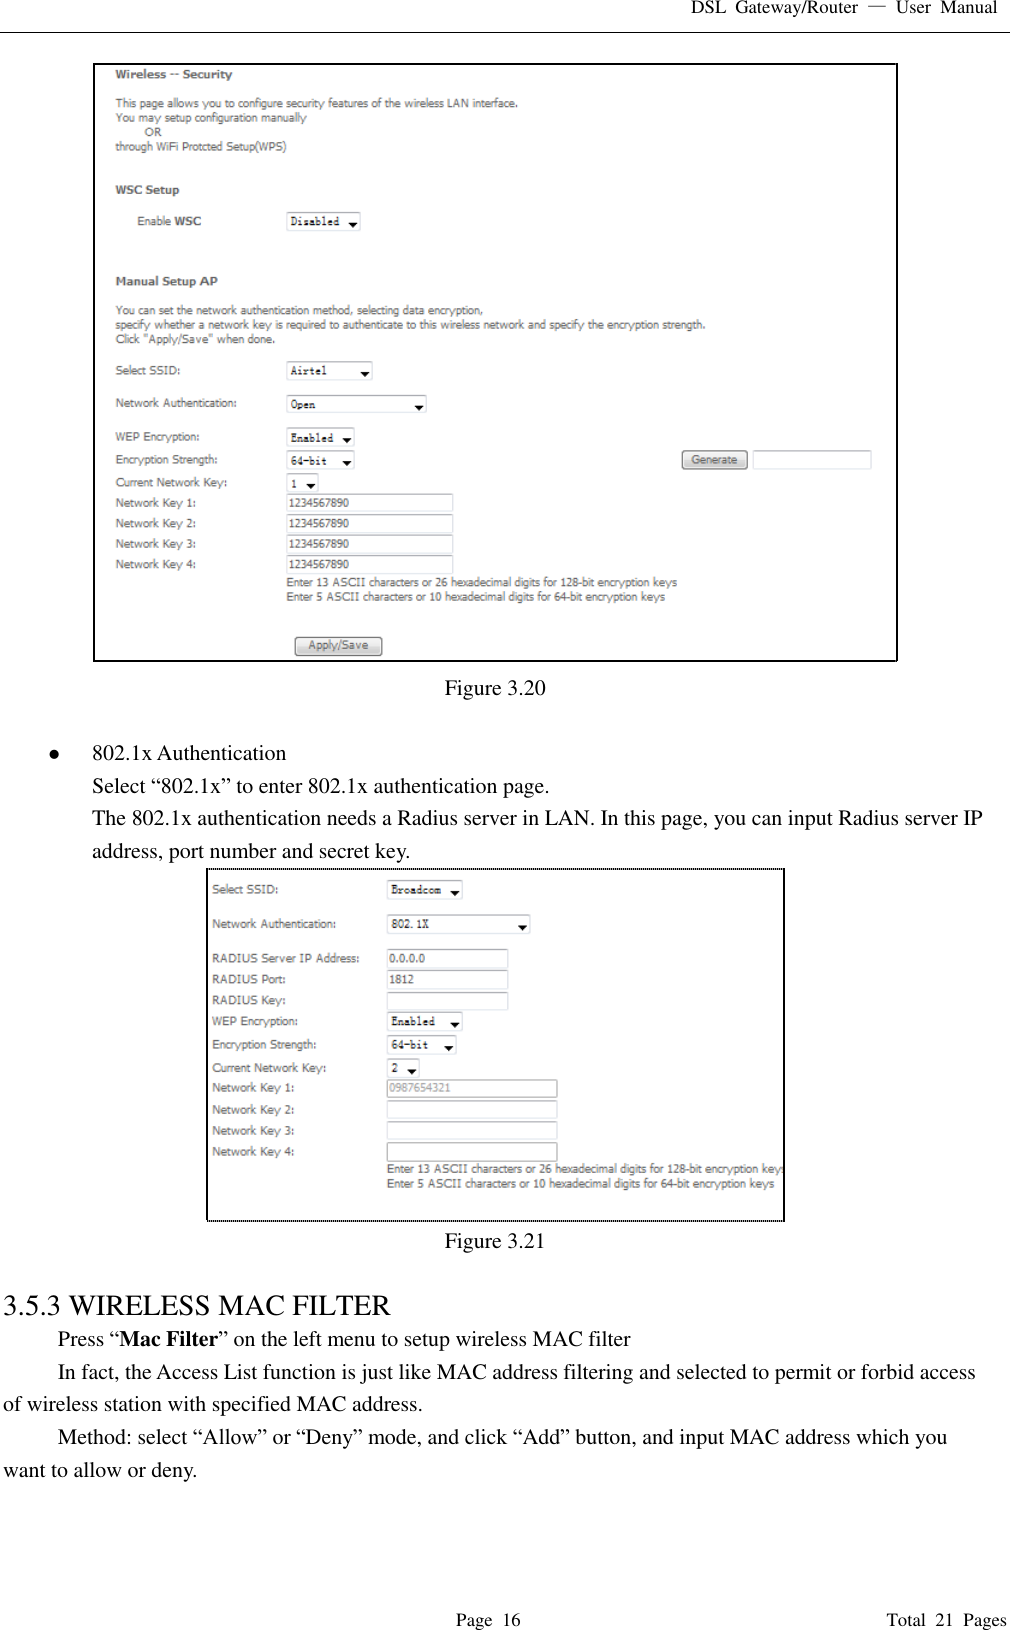 DSL  Gateway/Router  —  User  Manual   Page  16                                                                              Total  21  Pages  Figure 3.20     802.1x Authentication Select “802.1x” to enter 802.1x authentication page.   The 802.1x authentication needs a Radius server in LAN. In this page, you can input Radius server IP address, port number and secret key.  Figure 3.21  3.5.3 WIRELESS MAC FILTER Press “Mac Filter” on the left menu to setup wireless MAC filter In fact, the Access List function is just like MAC address filtering and selected to permit or forbid access of wireless station with specified MAC address. Method: select “Allow” or “Deny” mode, and click “Add” button, and input MAC address which you want to allow or deny.   